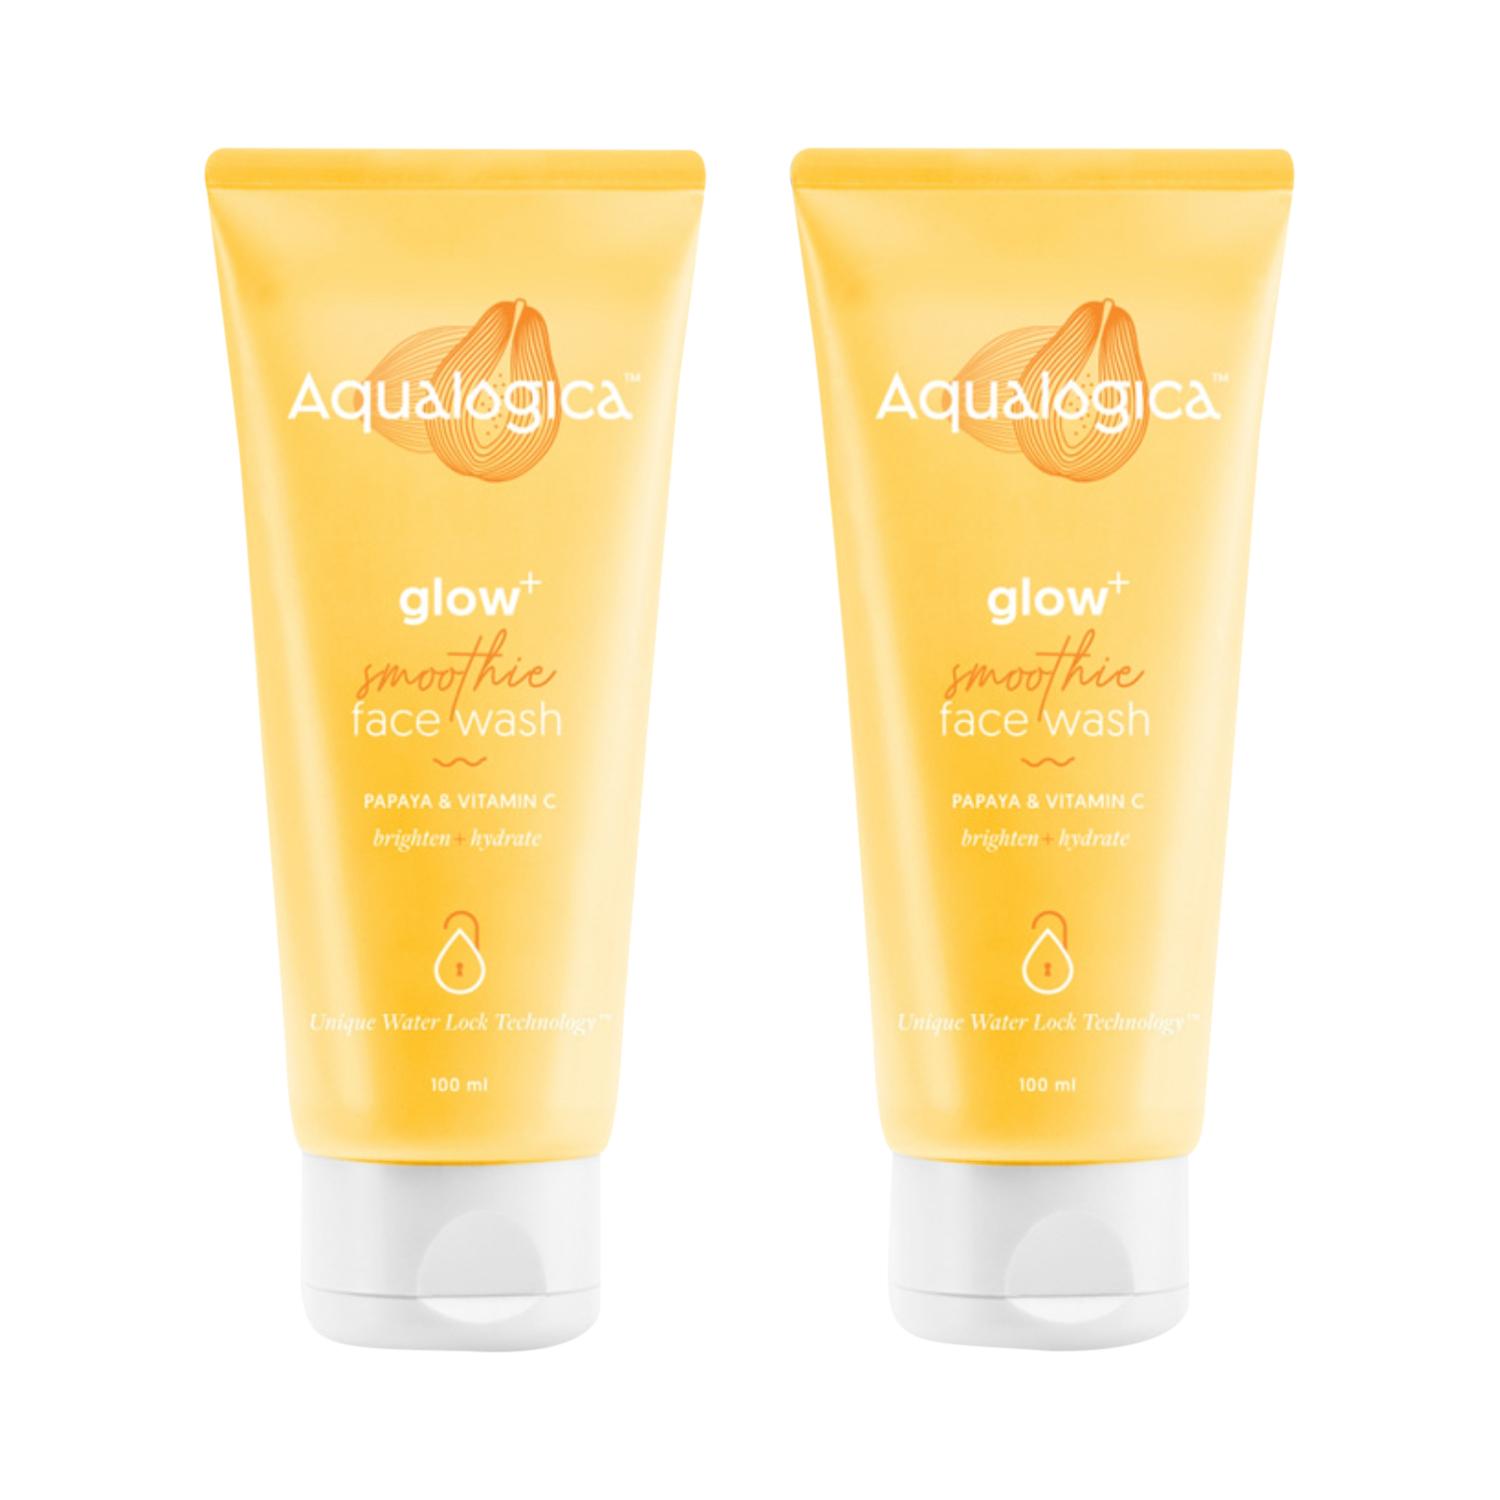 Aqualogica | Aqualogica Glow+ Smoothie Face Wash -(100ml)(Pack of 2) Combo